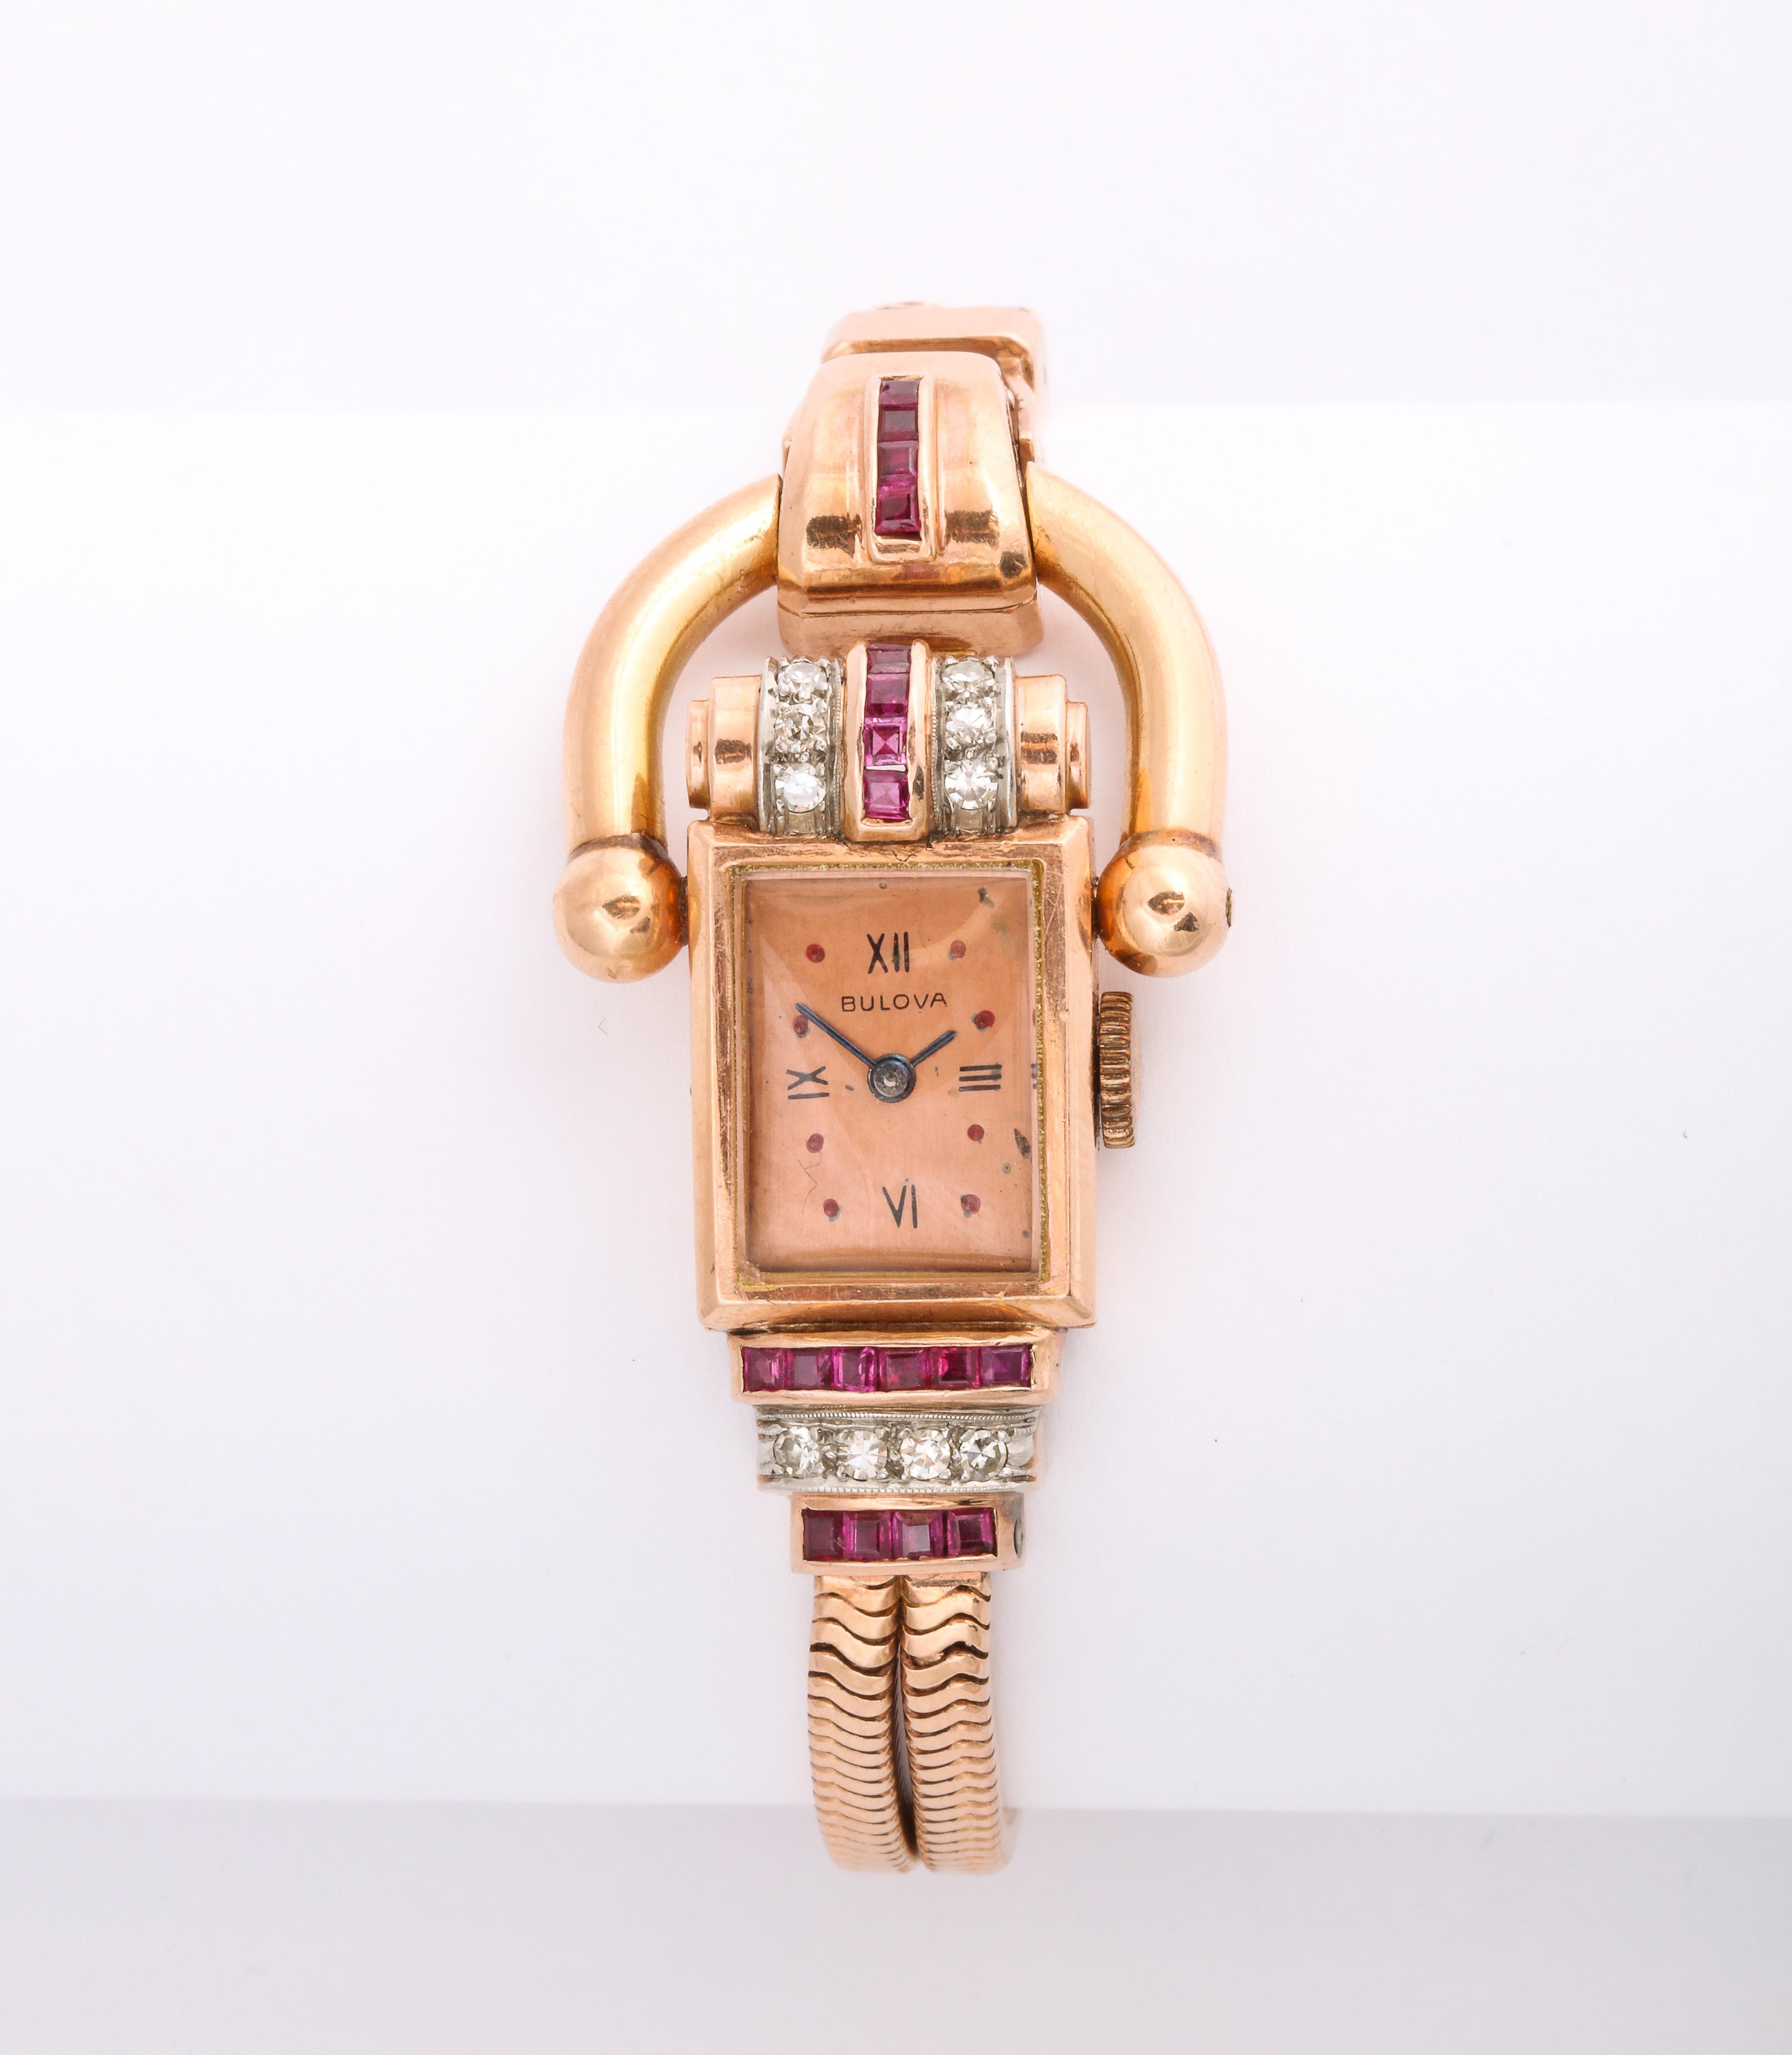 Following the equestrian motif similar to that of Cartier and Hermes, and various jewelers around the world, this watch is the epitome of feminine refinement. The double snake chain band is flexible and sinuous permitting the watch to drape on your